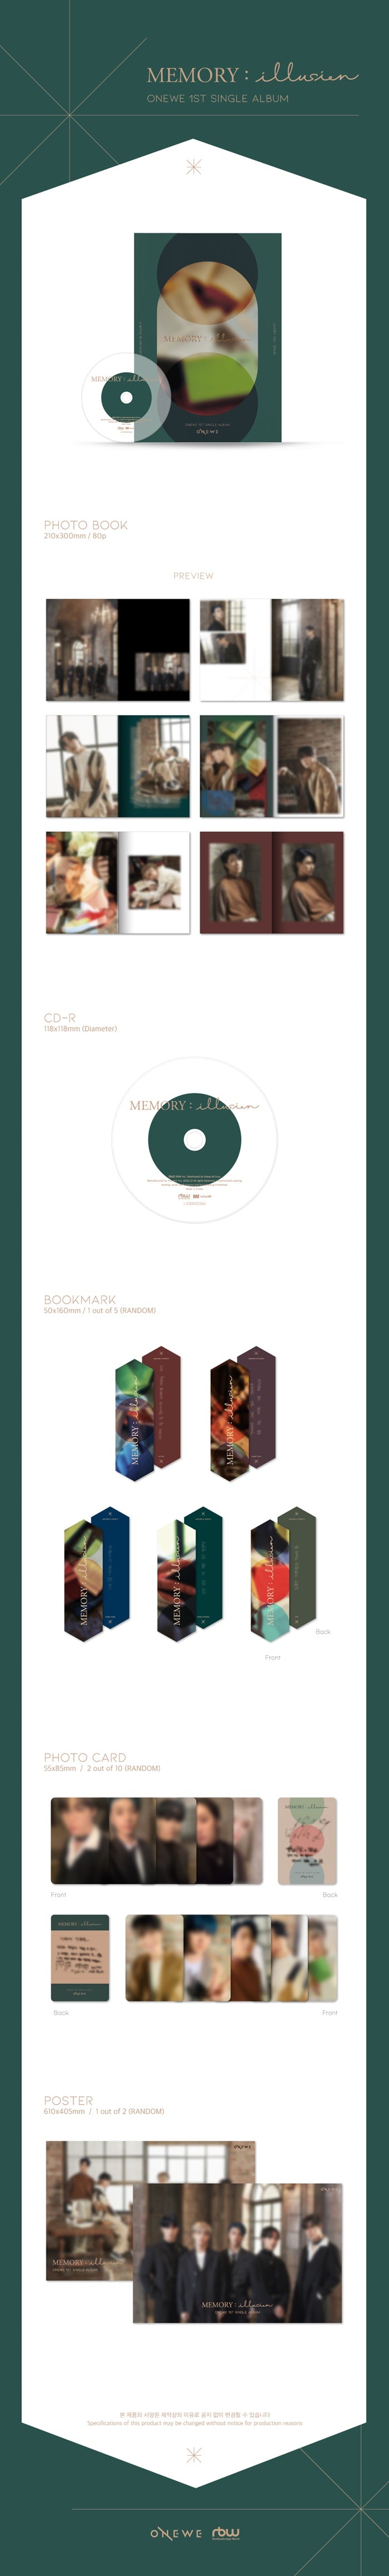 1 CD
1 Photo Book (80 pages)
1 Bookmark
2 Photo Cards